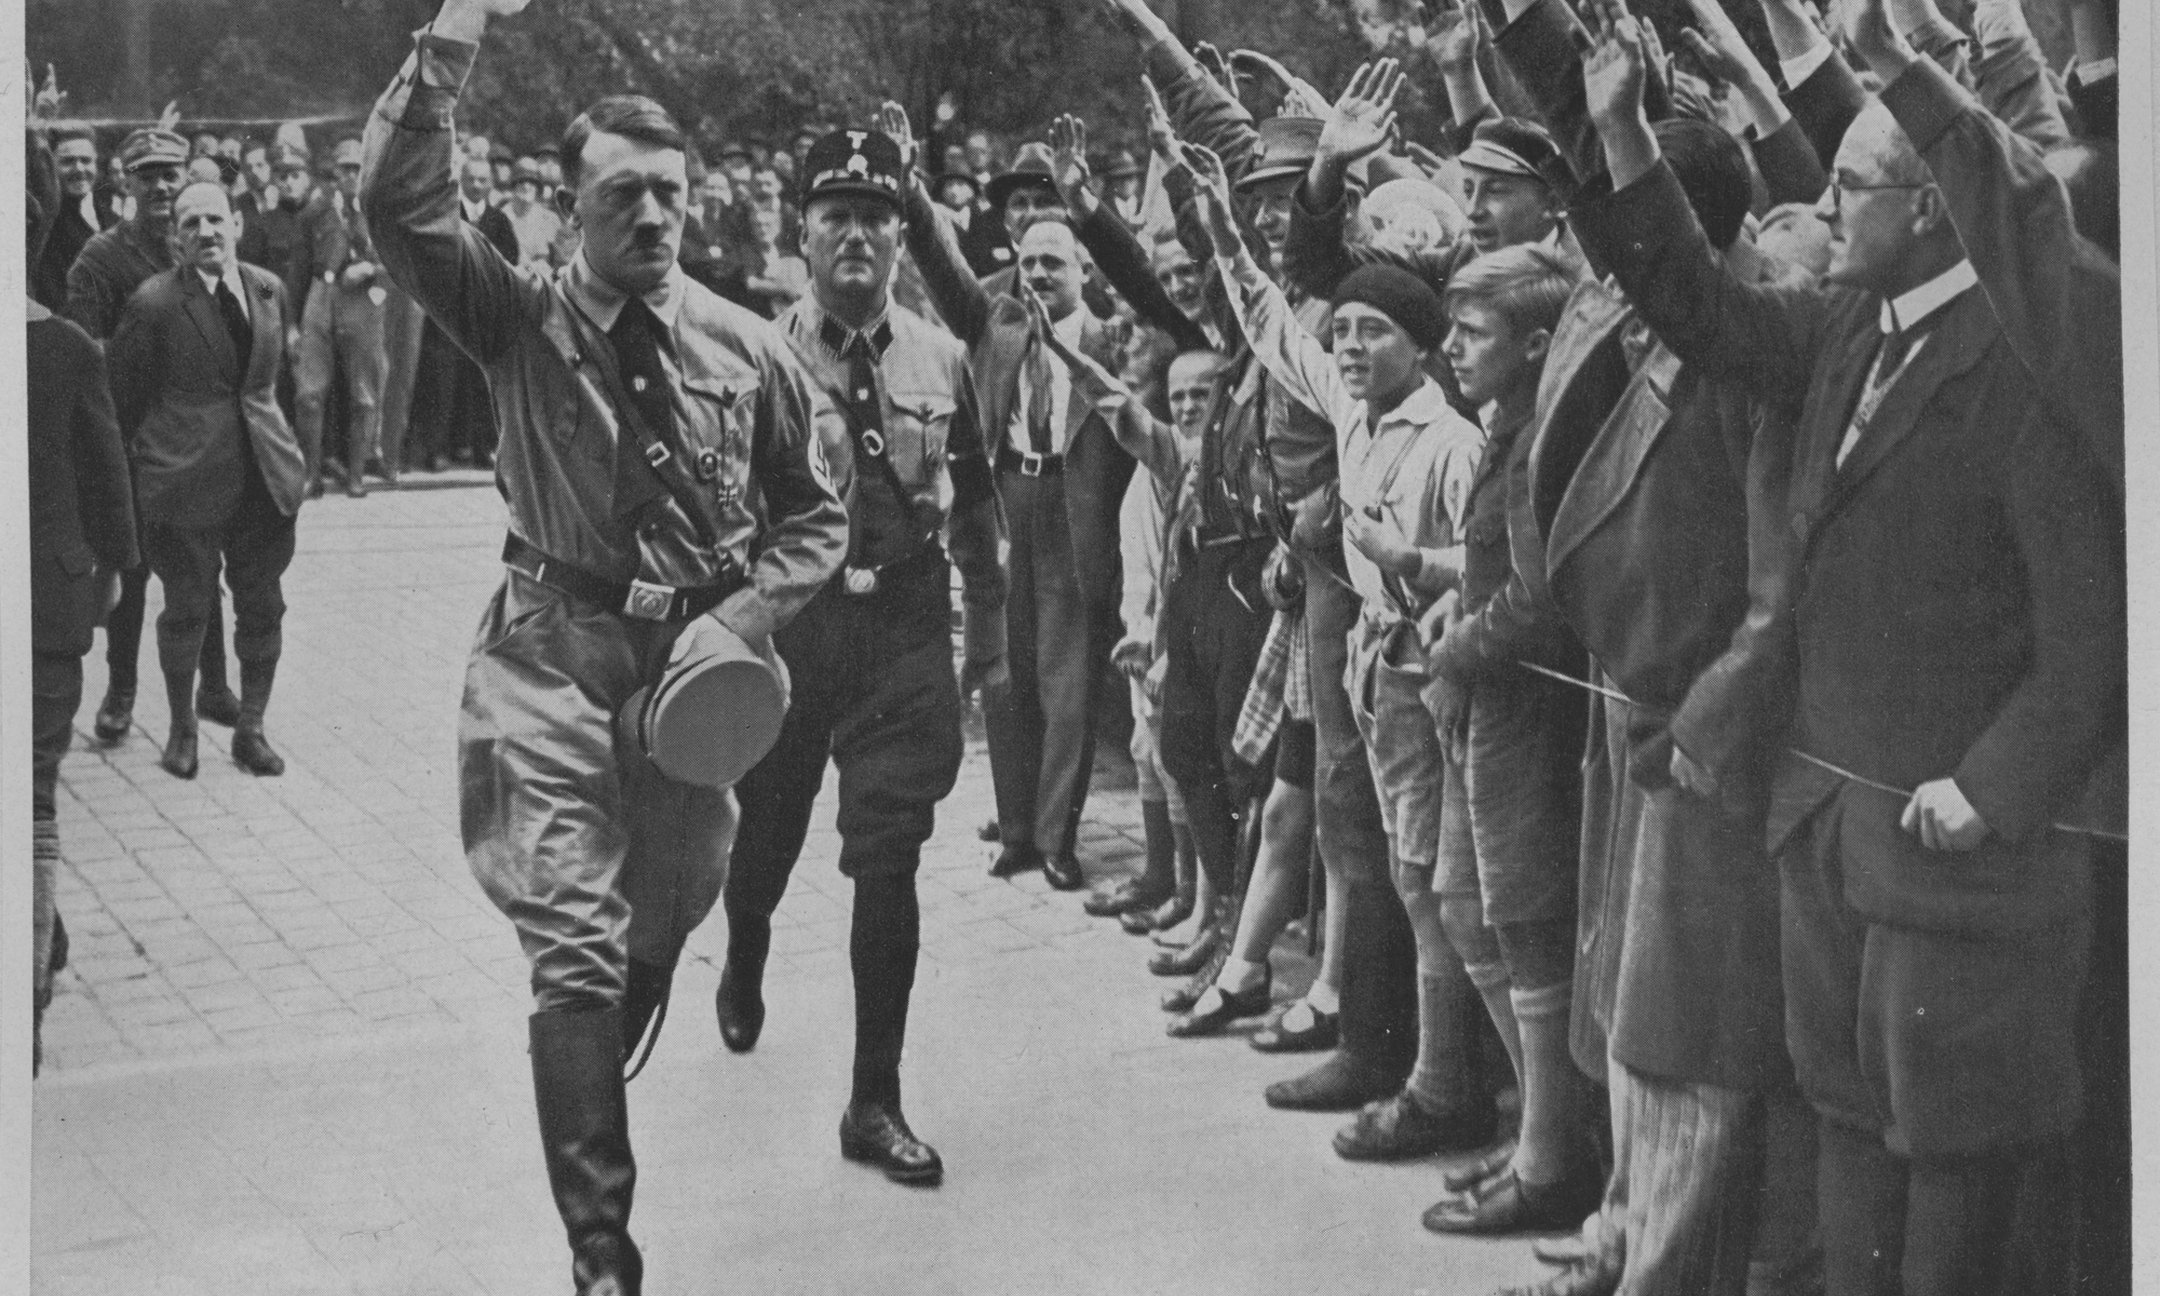 Adolf Hitler's followers greet him at a party conference in Neurenberg (1929). This and other pictures came with packets of cigarettes and were collected in special albums. This picture is from the series Deutschland erwacht [Germany awakes].